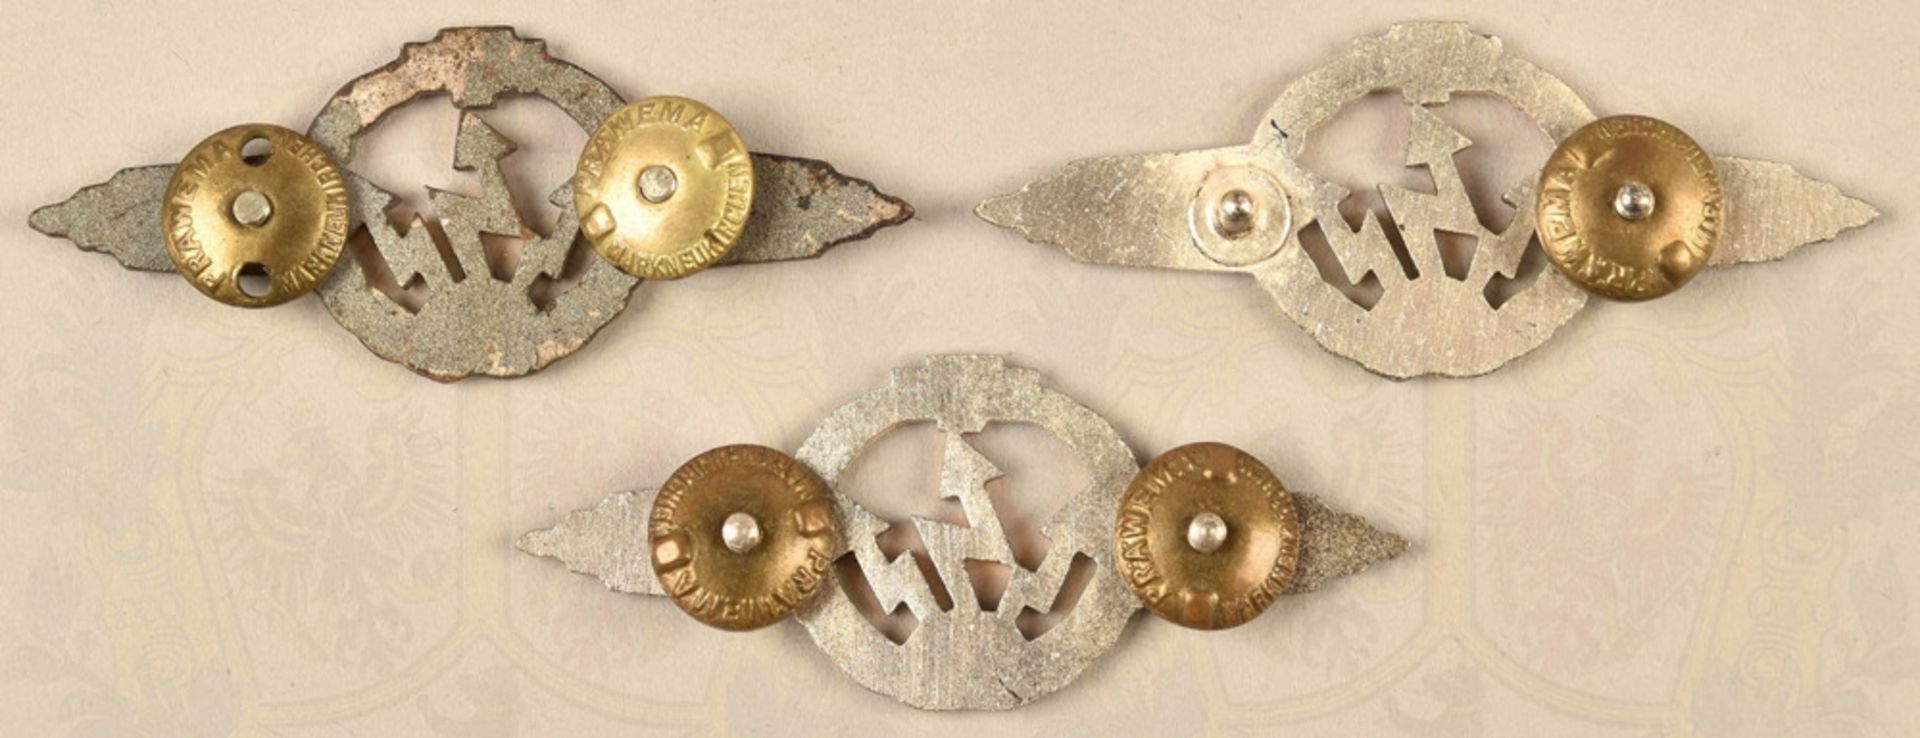 Set of GDR classification clasps for radio operators 1960-1962 - Image 2 of 2